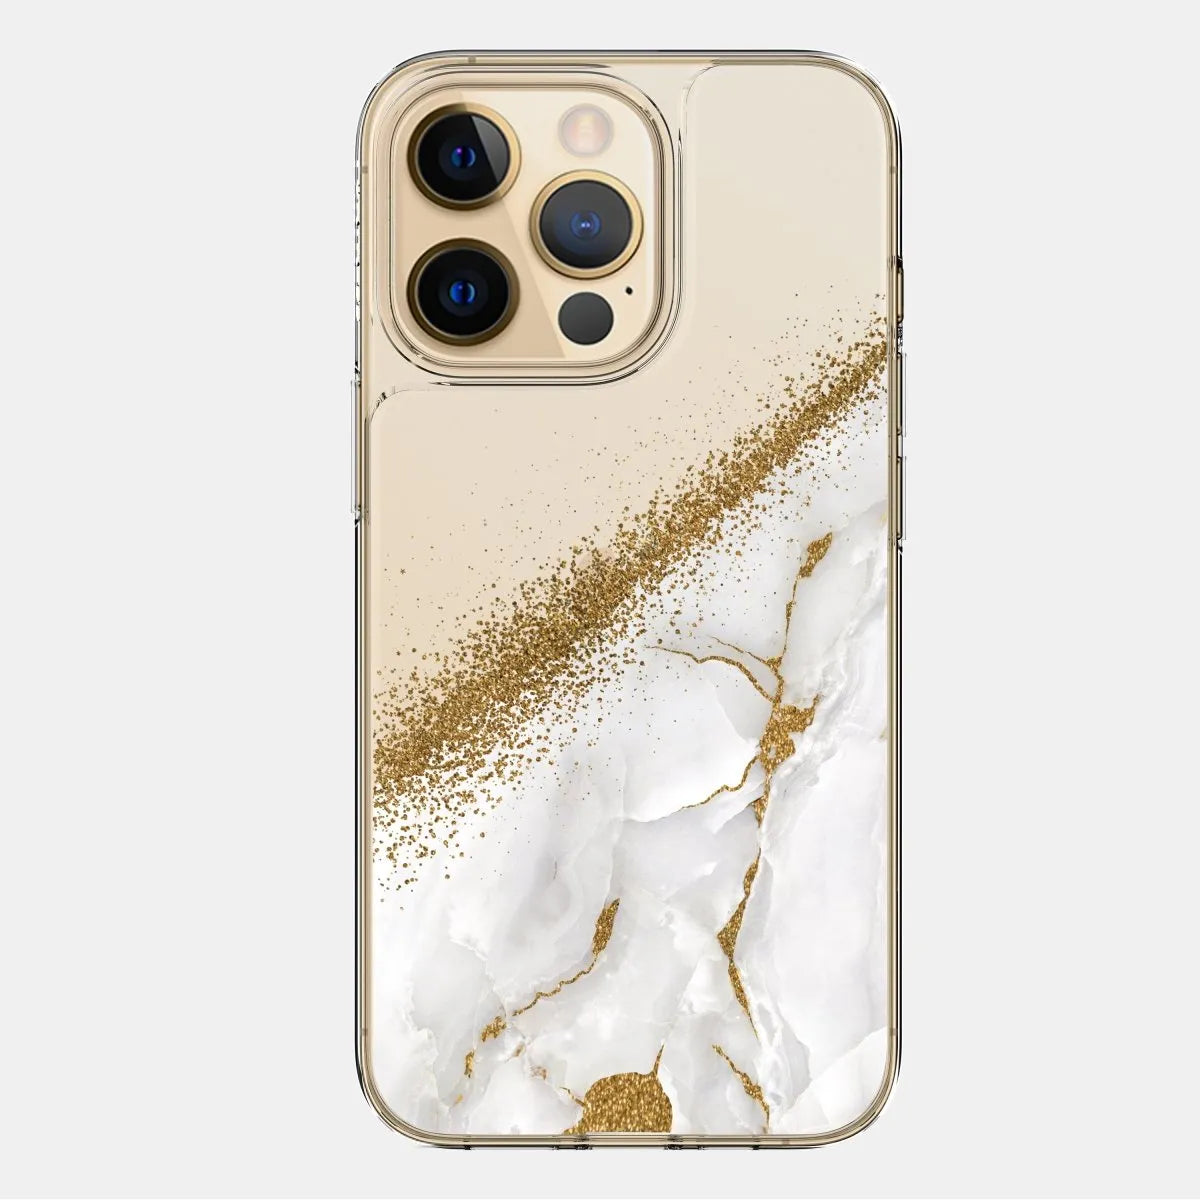 Fortress Fortress Swipe Style Inserts (24K Collection) for iPhone 13 Pro Max Infinite Glass Case  Infinite Glass 